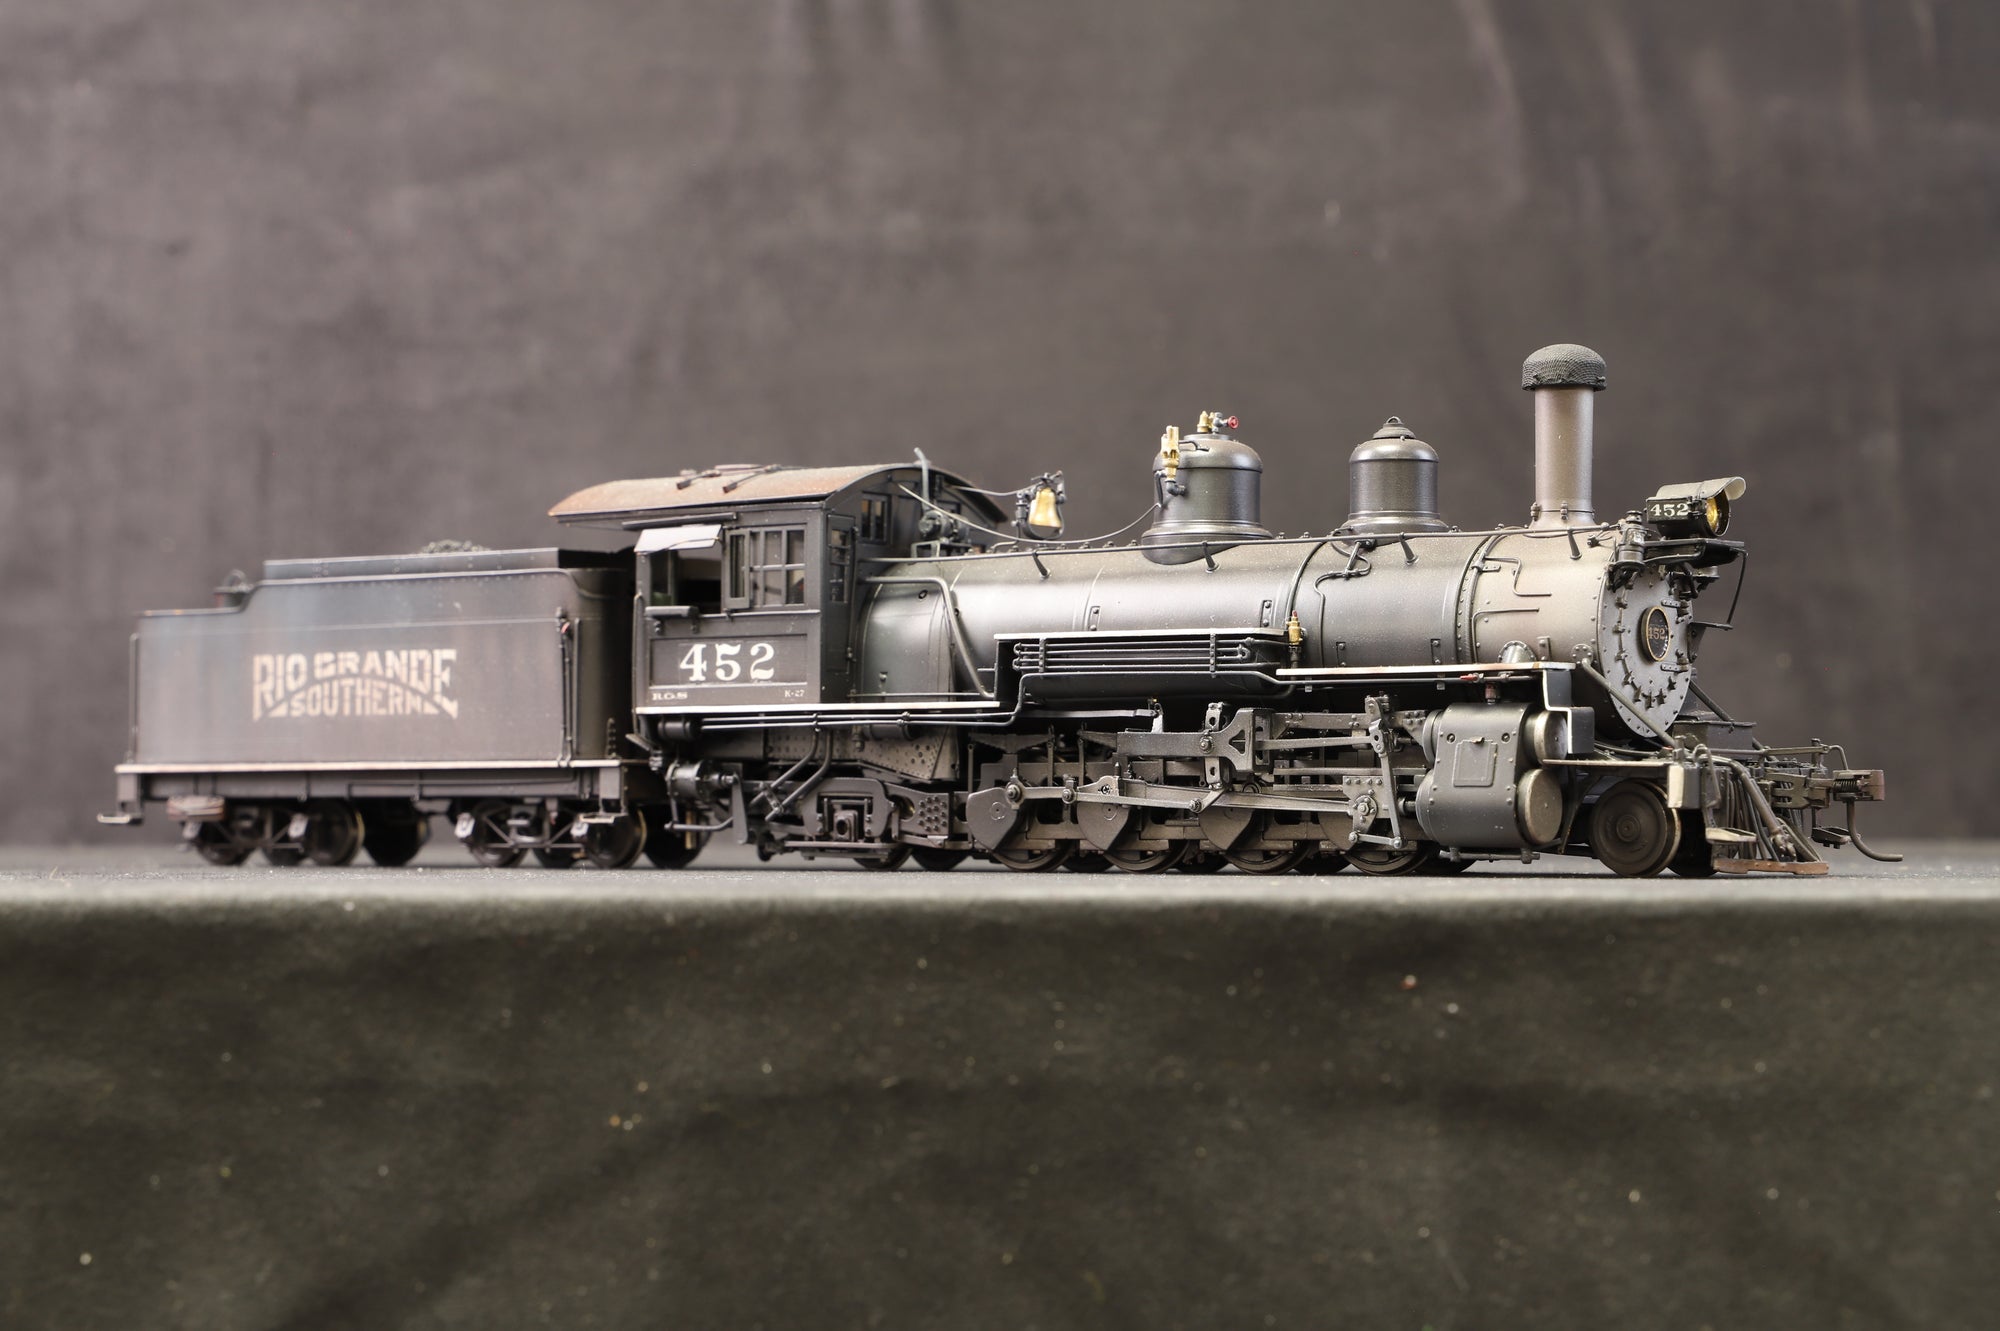 PSC (Precision Scale Models) Brass On3 Rio Grande Southern K-27 '452', Weathered